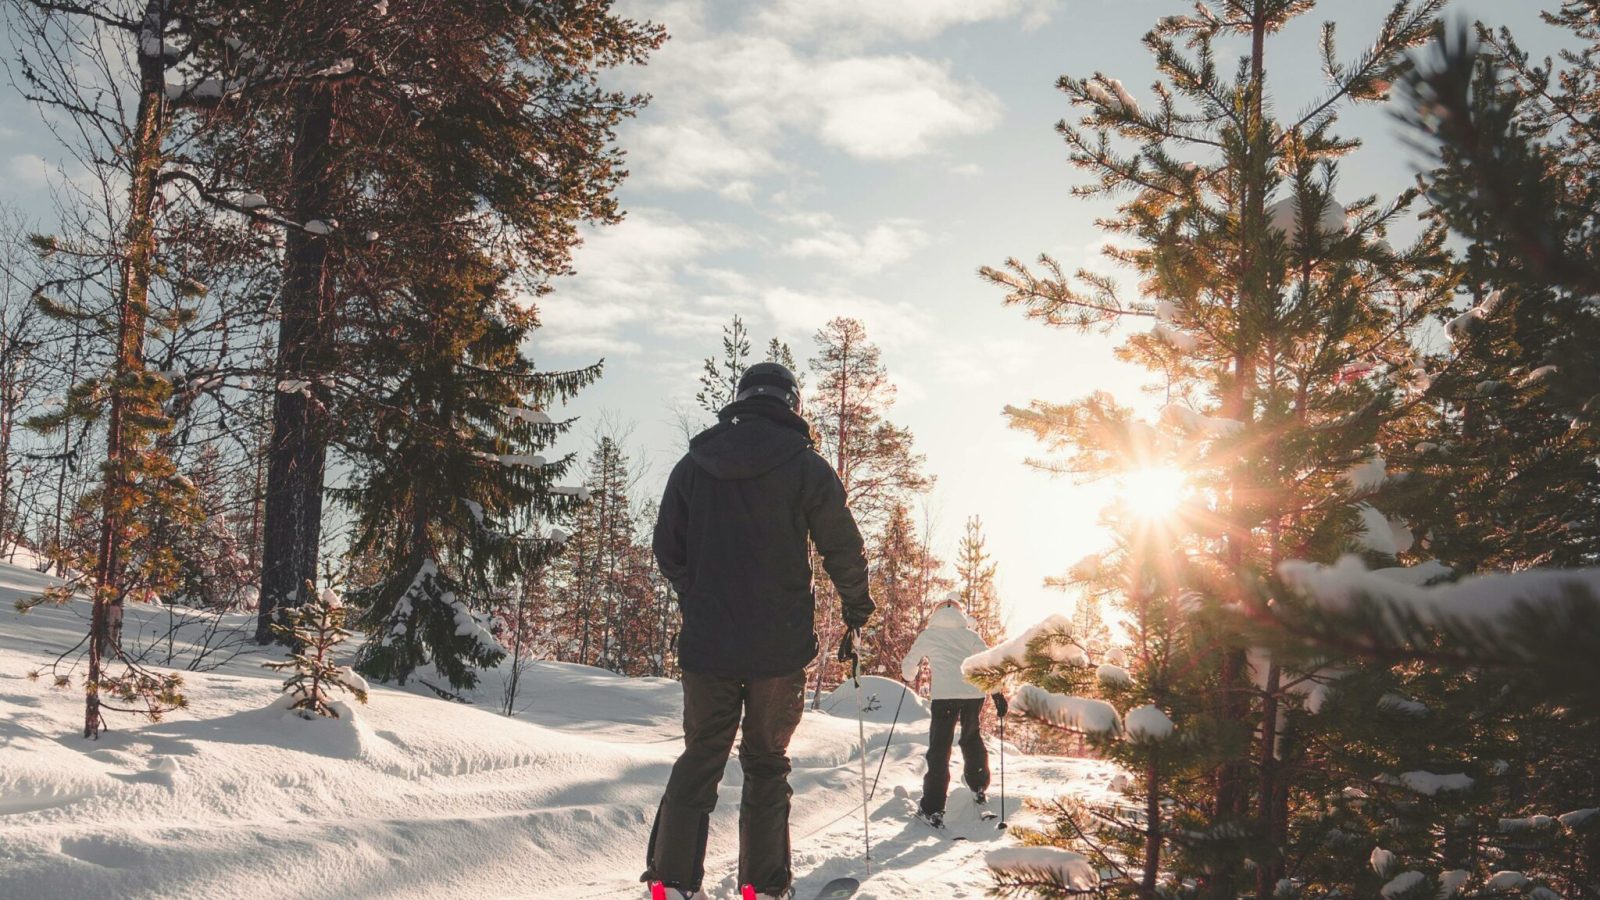 A delightful scene of a couple enjoying cross country skiing, gracefully gliding through the serene winter landscape.